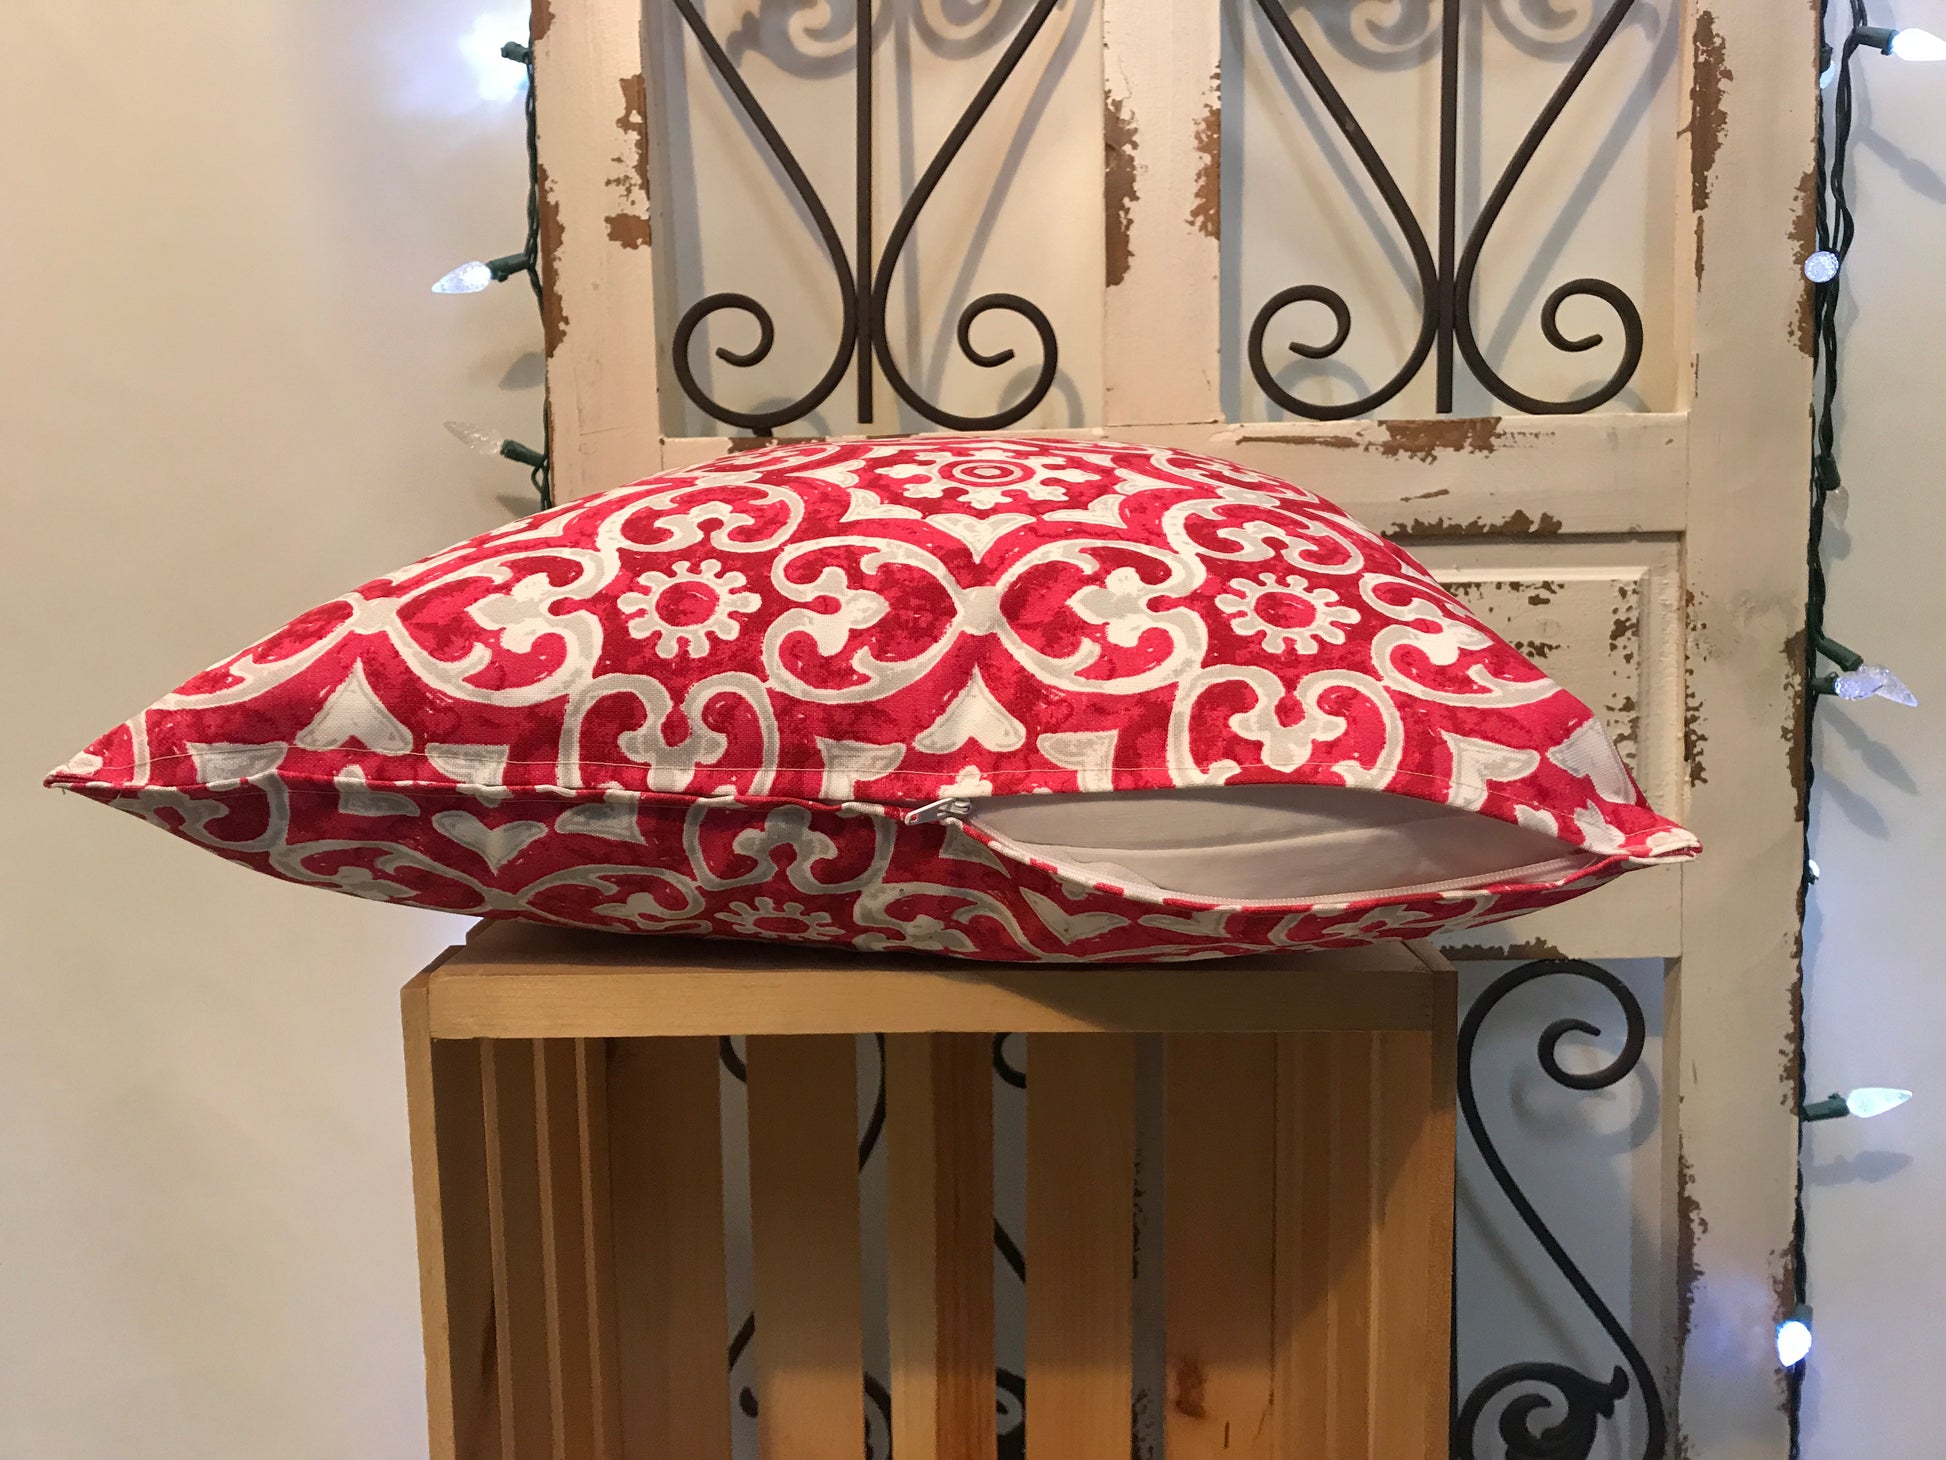 18" Red & Grey Pillow Covers - InRugCo Studio & Gift Shop